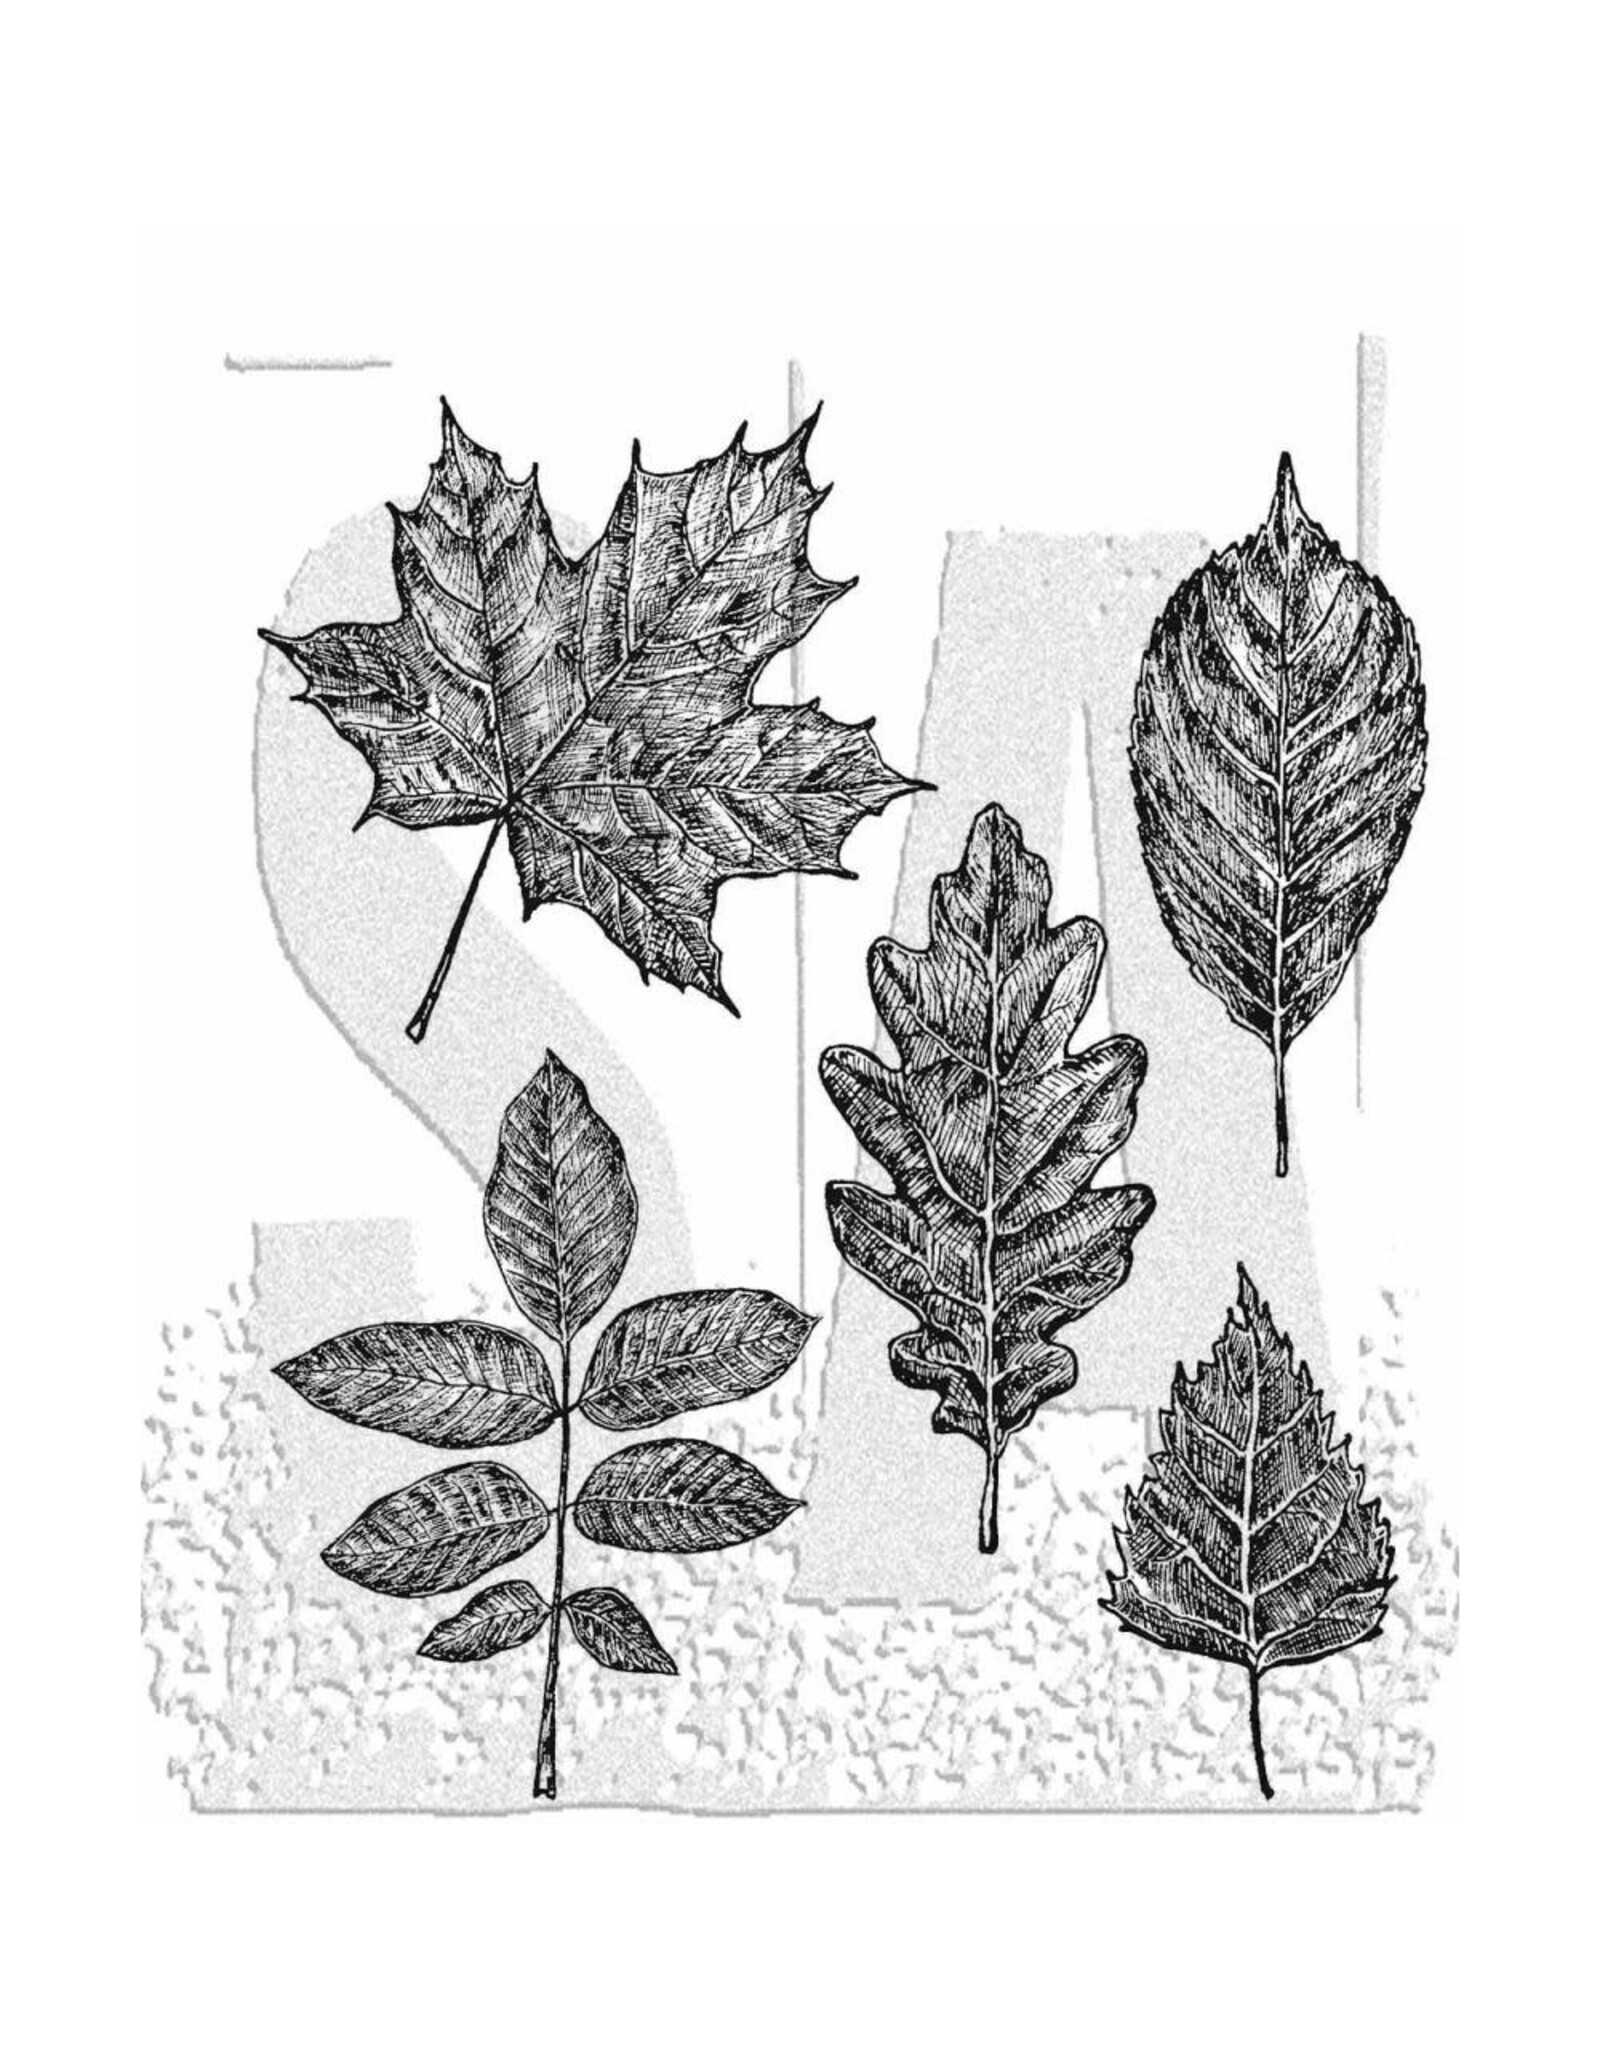 STAMPERS ANONYMOUS STAMPERS ANONYMOUS TIM HOLTZ SKETCHY LEAVES 7x8.5 CLING STAMP SET